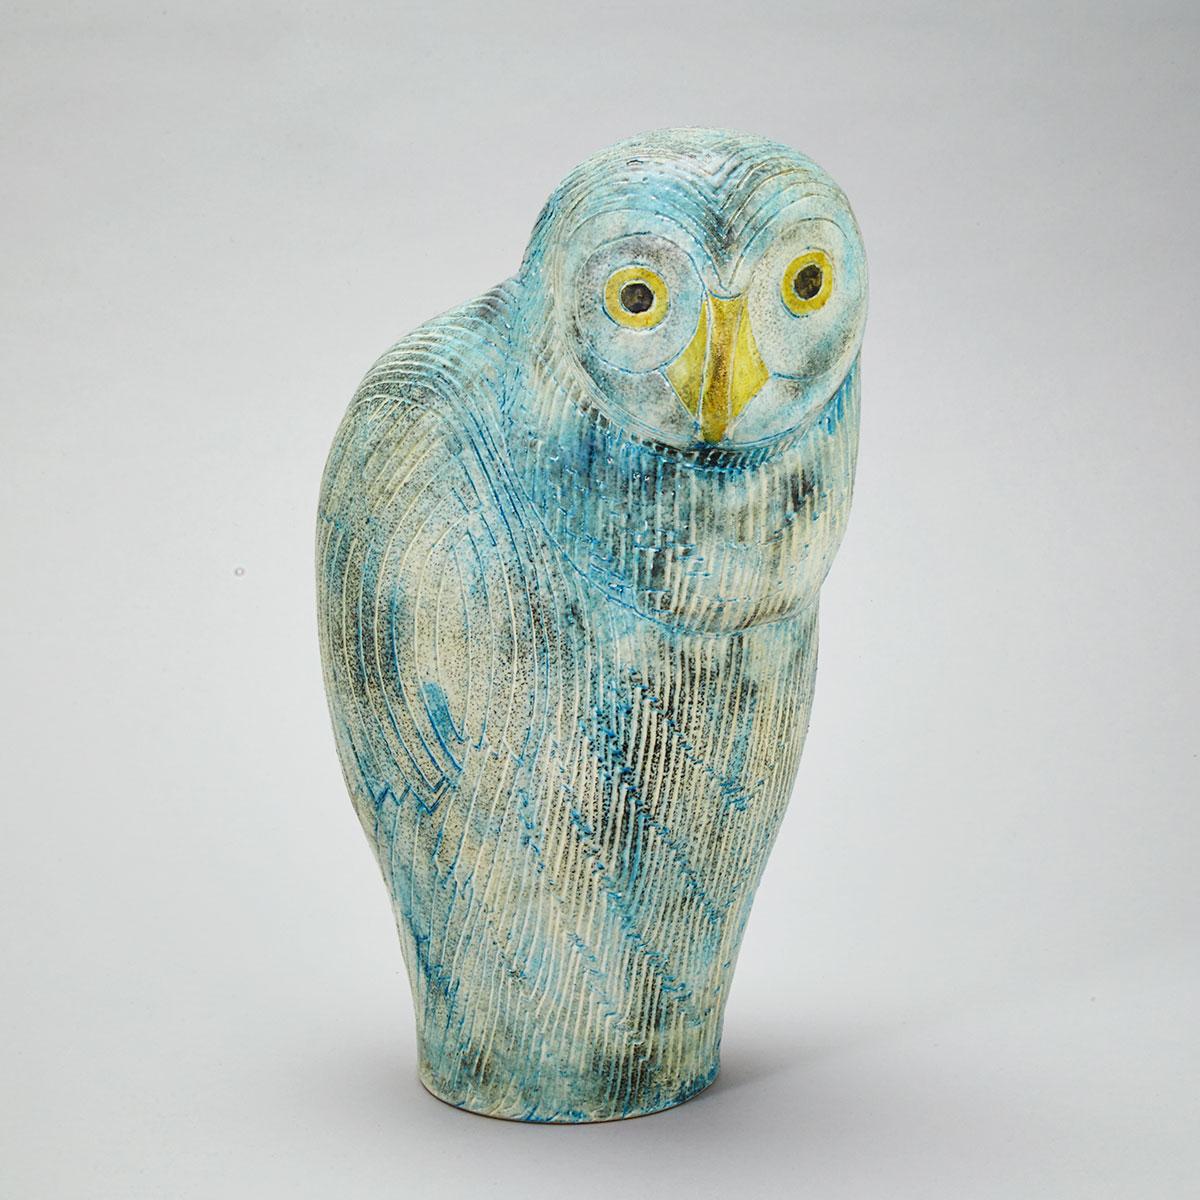 Brooklin Pottery Owl, Theo and Susan Harlander, c.1980